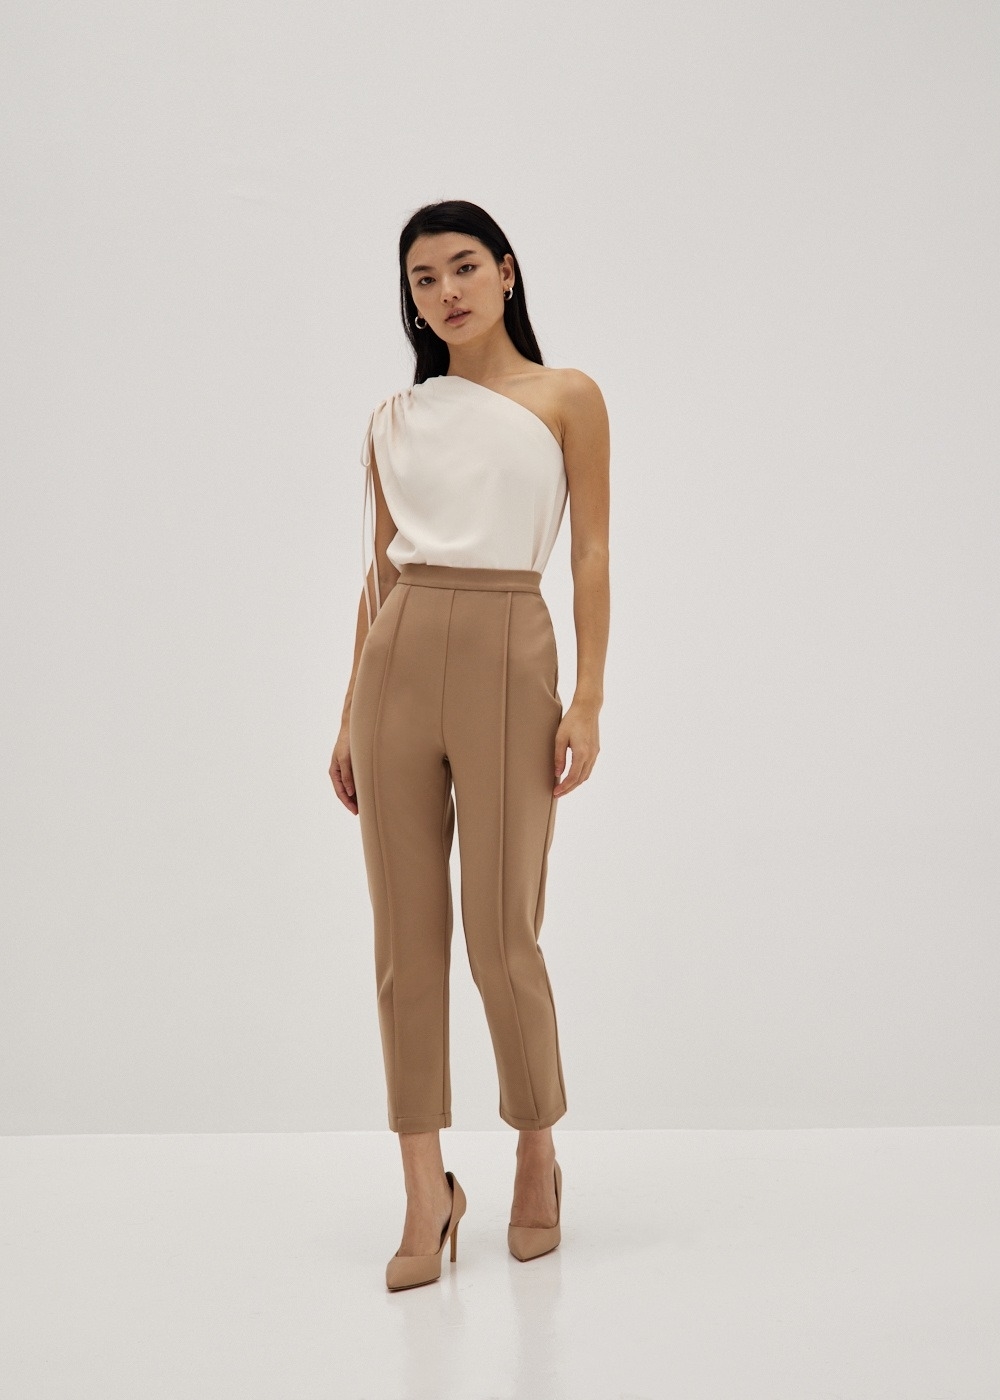 a model wearing the tan pants with a white top